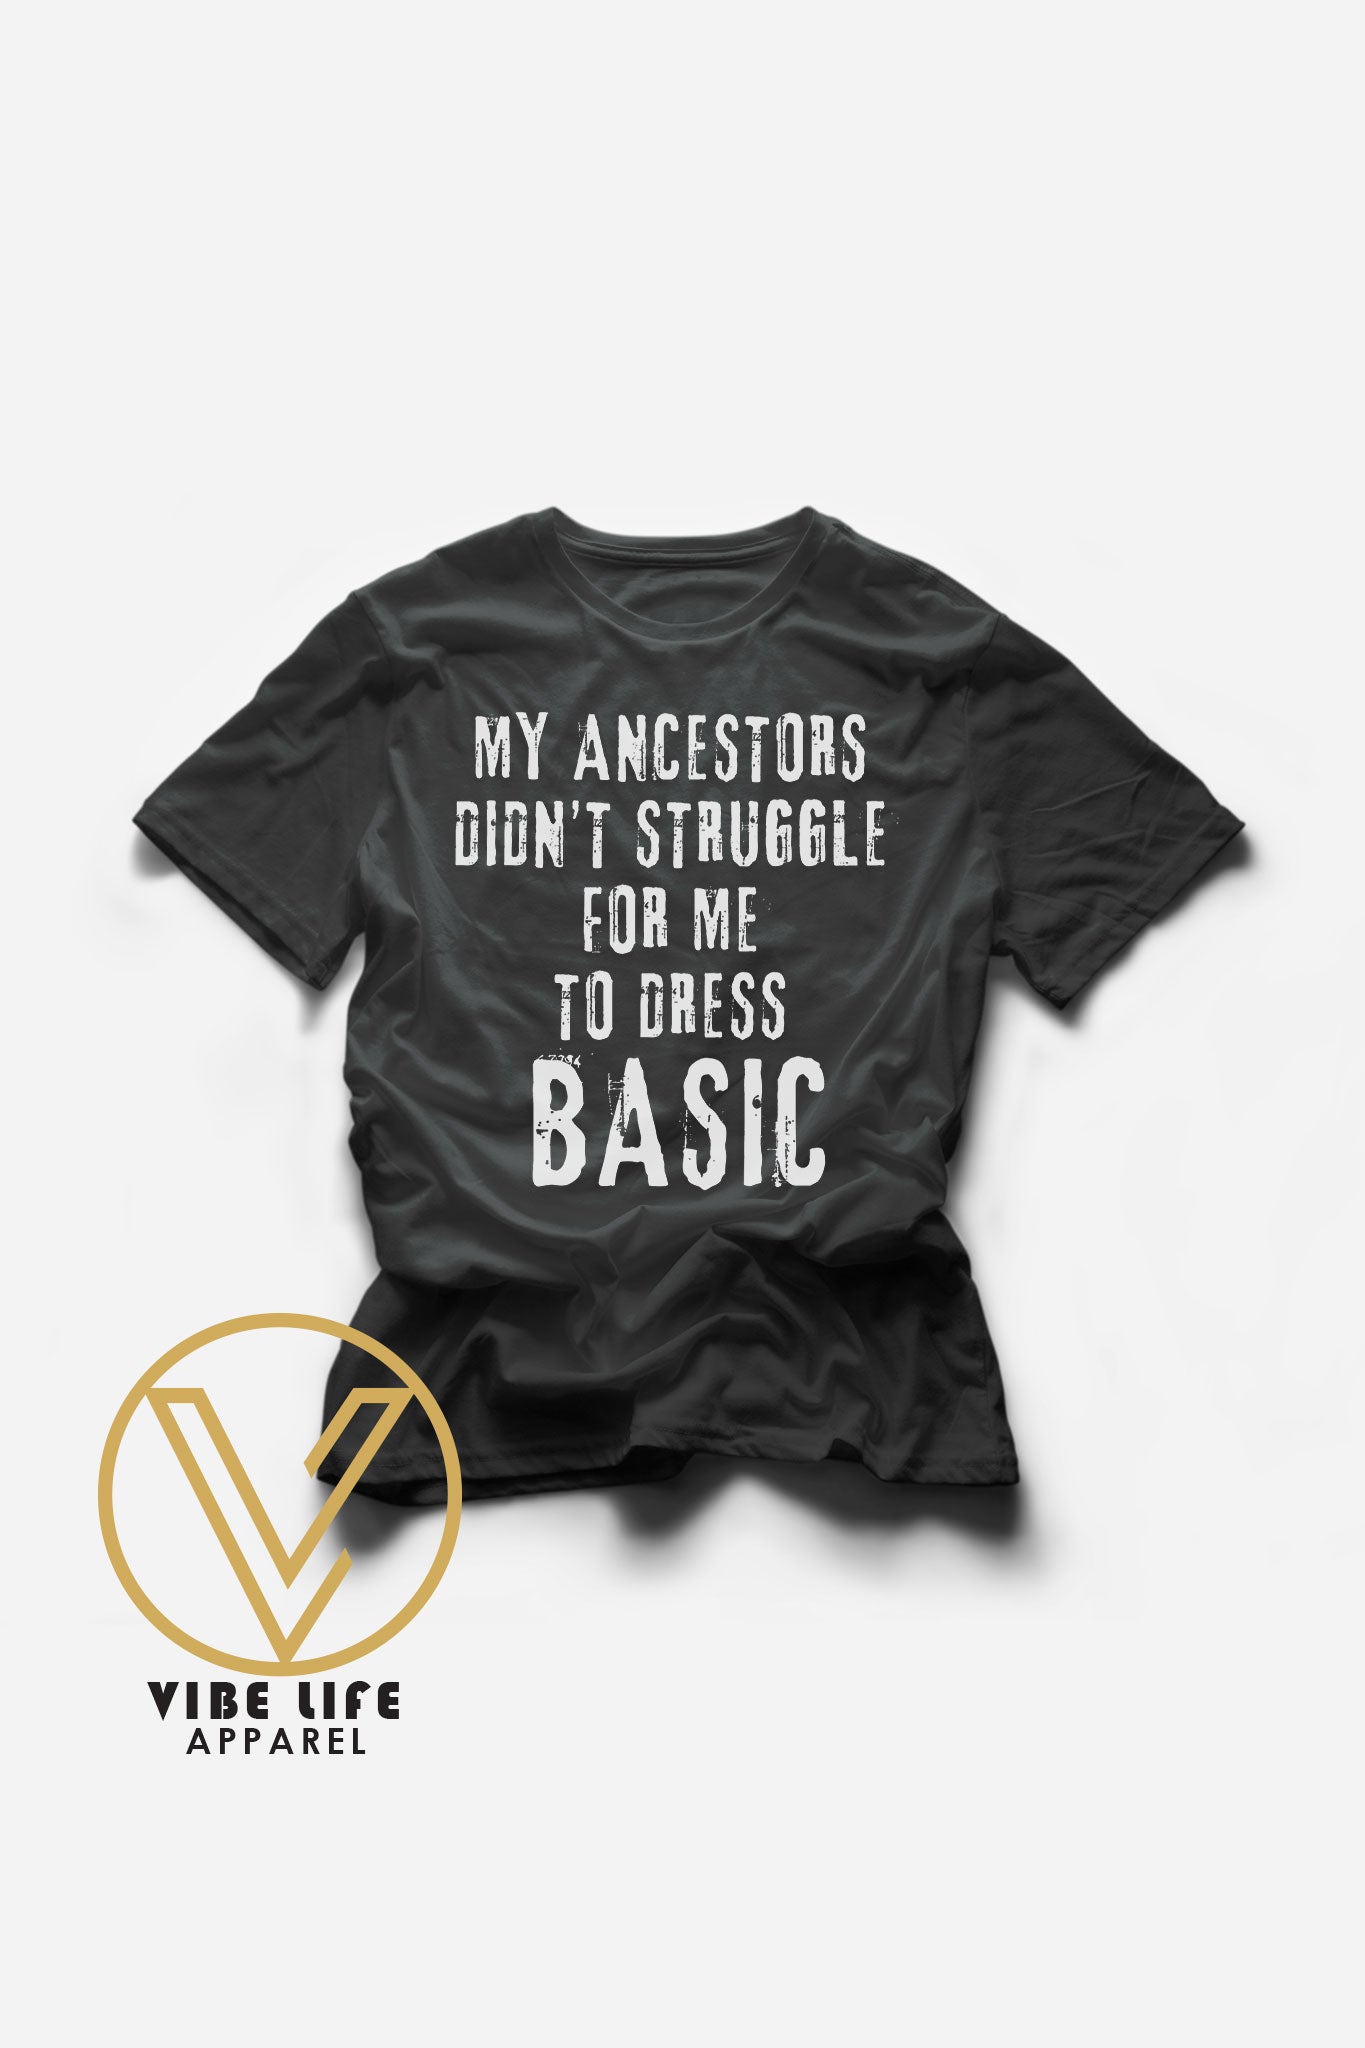 My Anscestors Didn't Struggle For Me to Dress Basic - Adult Unisex Tee